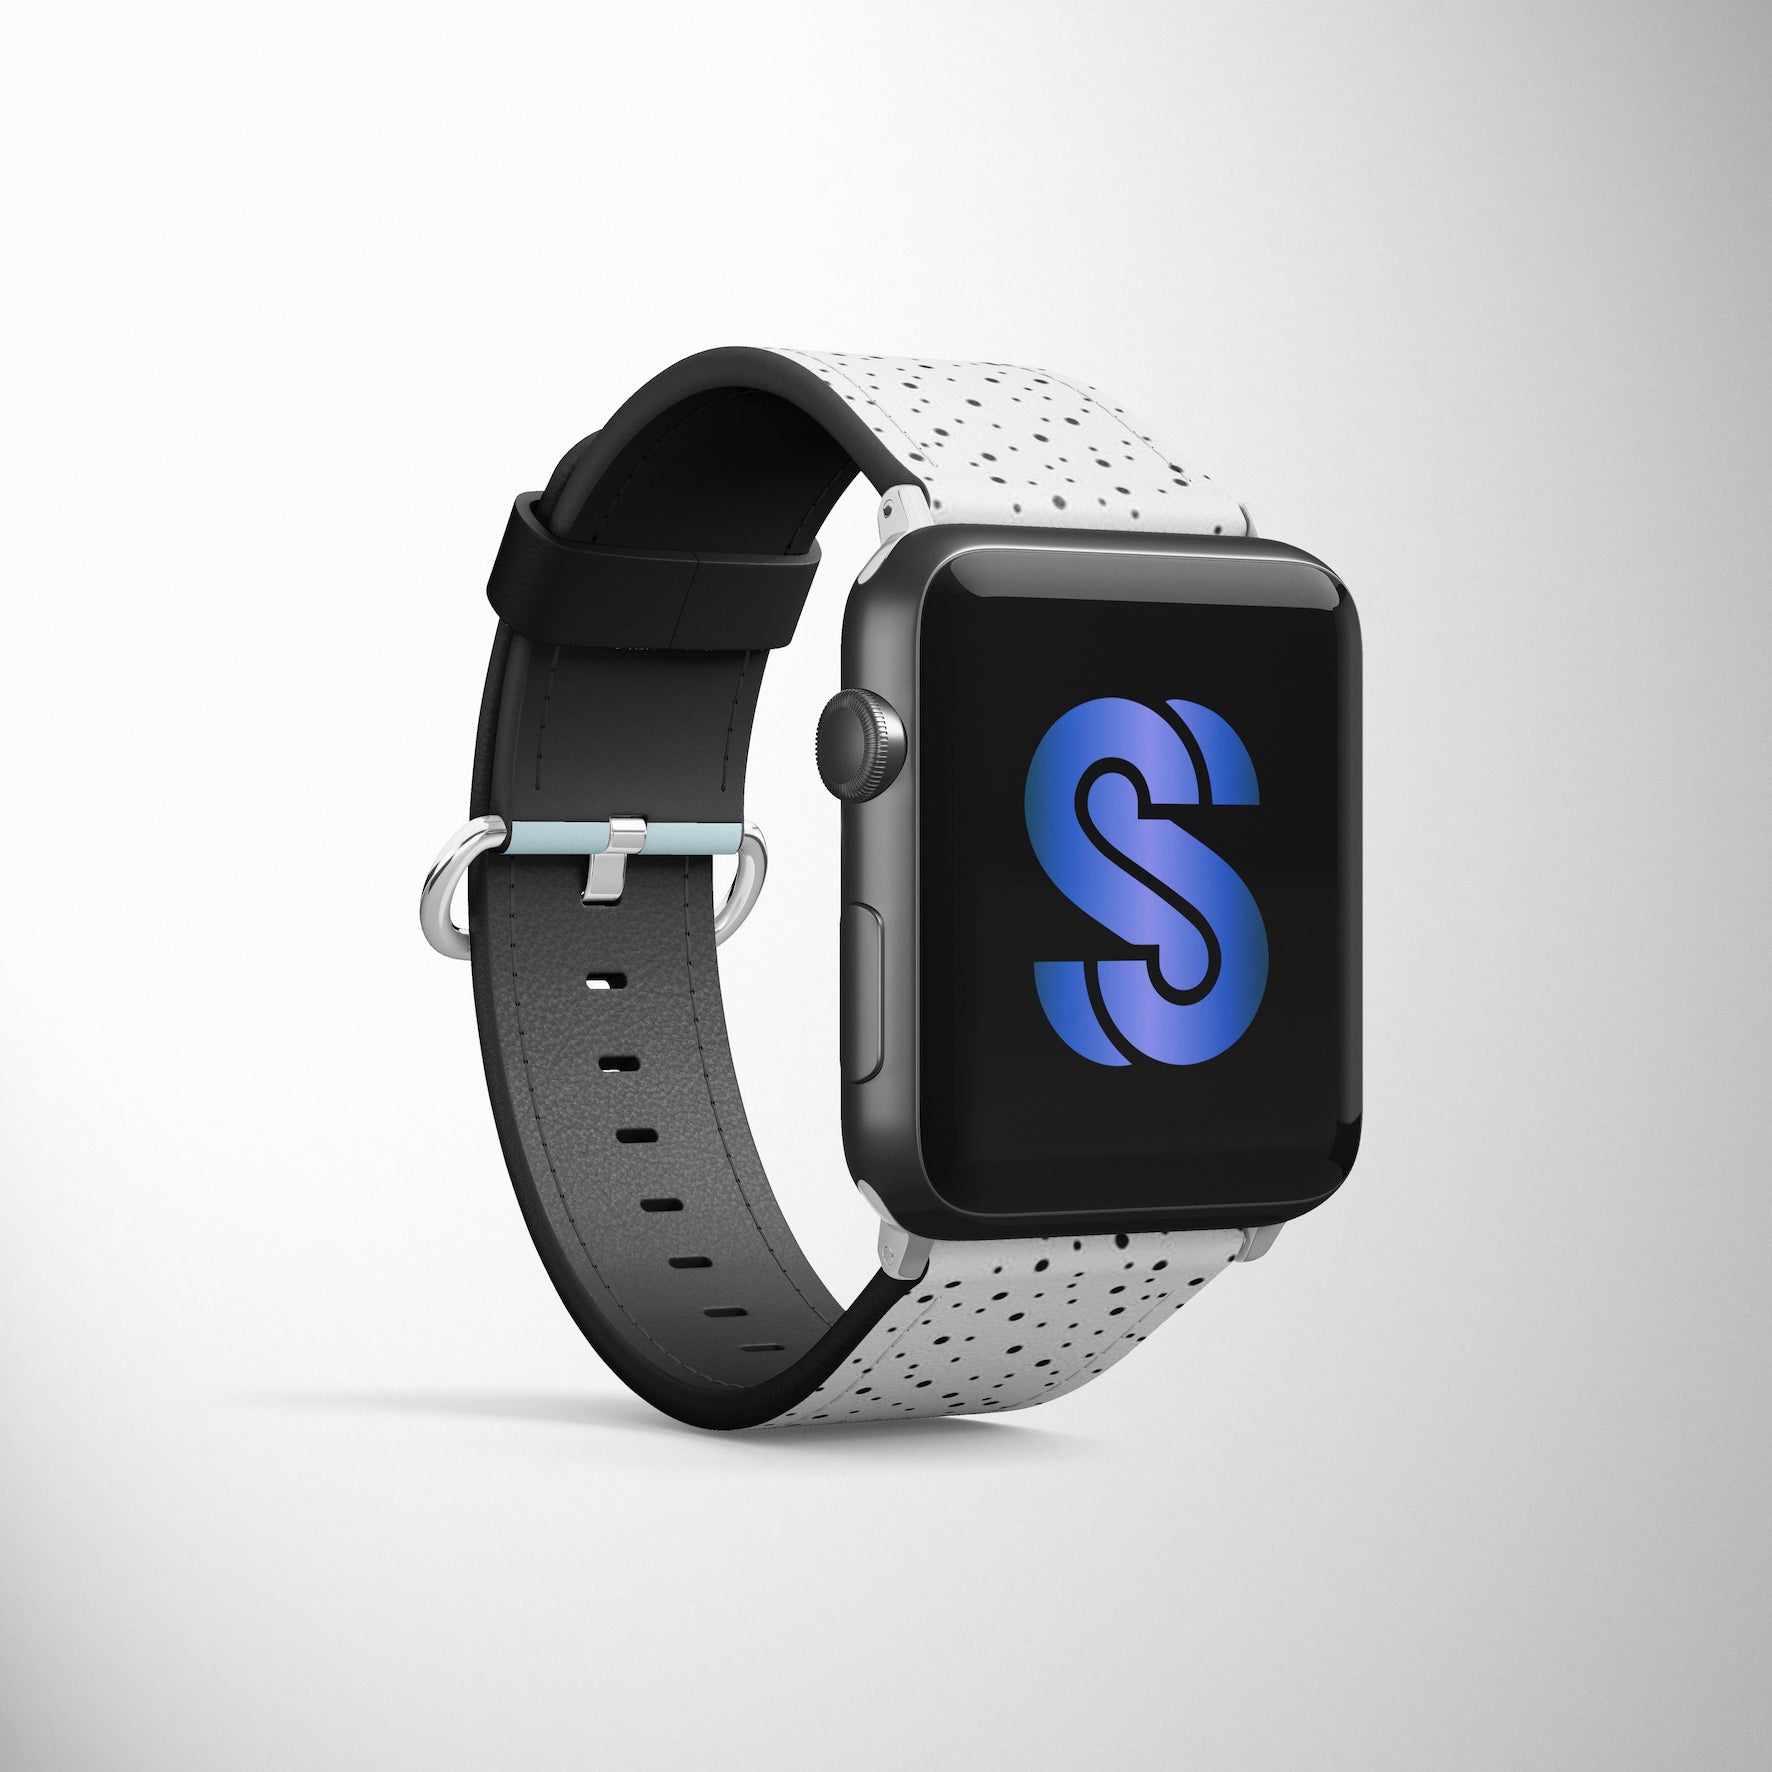 Dots On Blue Pastel Faux Leather Apple Watch Band for Apple Watch 1,2,3,4,5,6,SE - www.scottsy.com